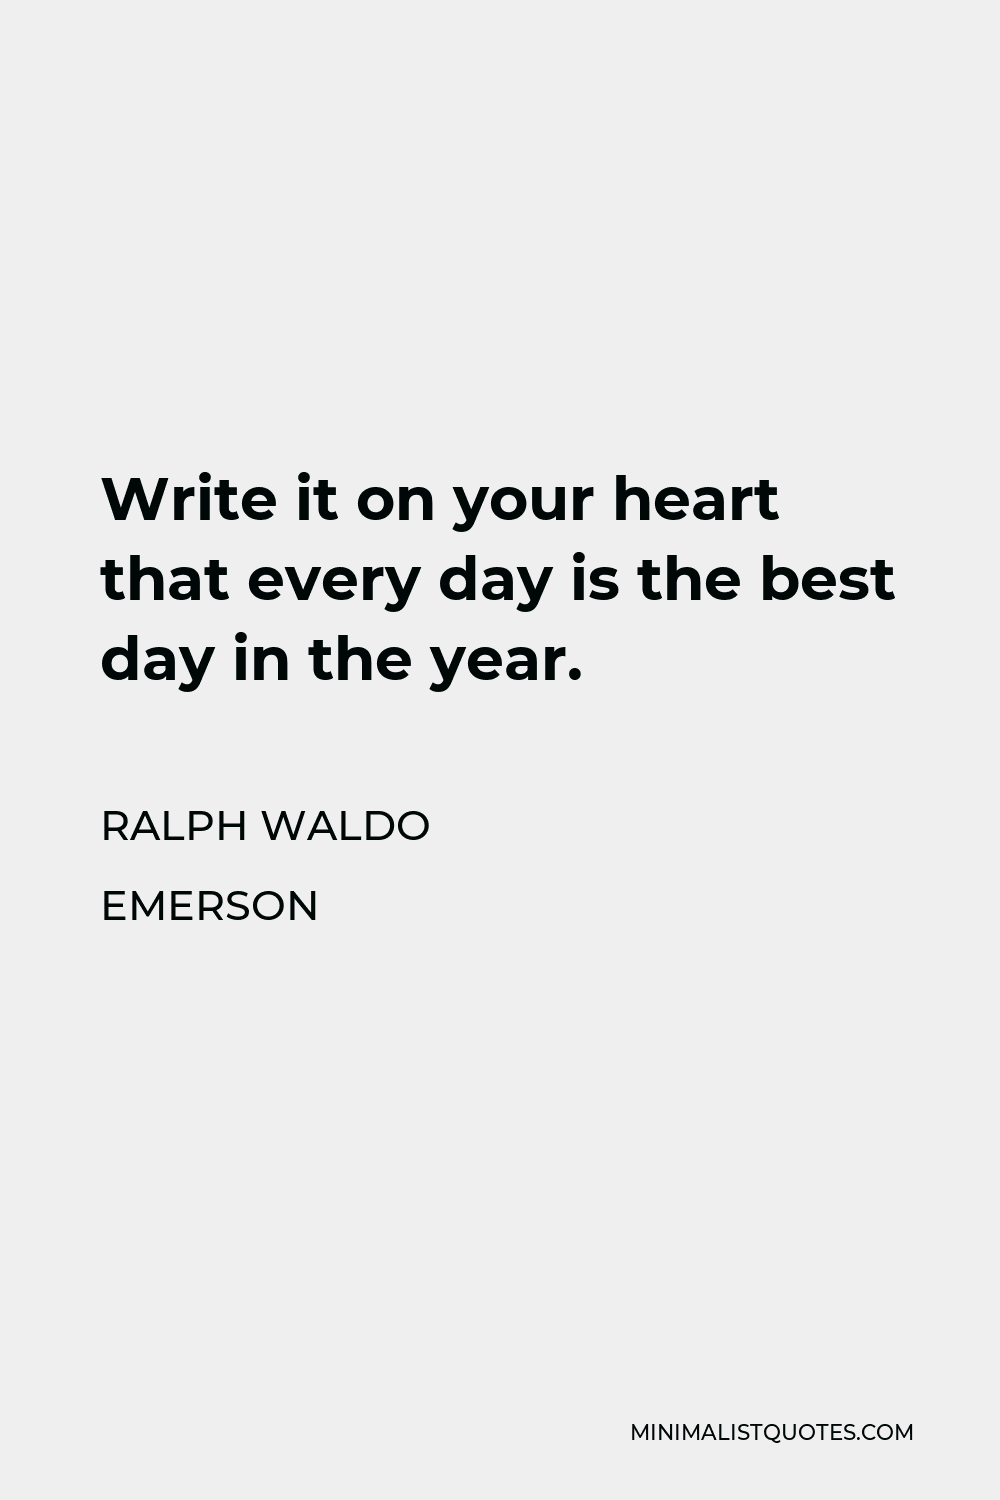 Ralph Waldo Emerson Quote - Write it on your heart that every day is the best day in the year.